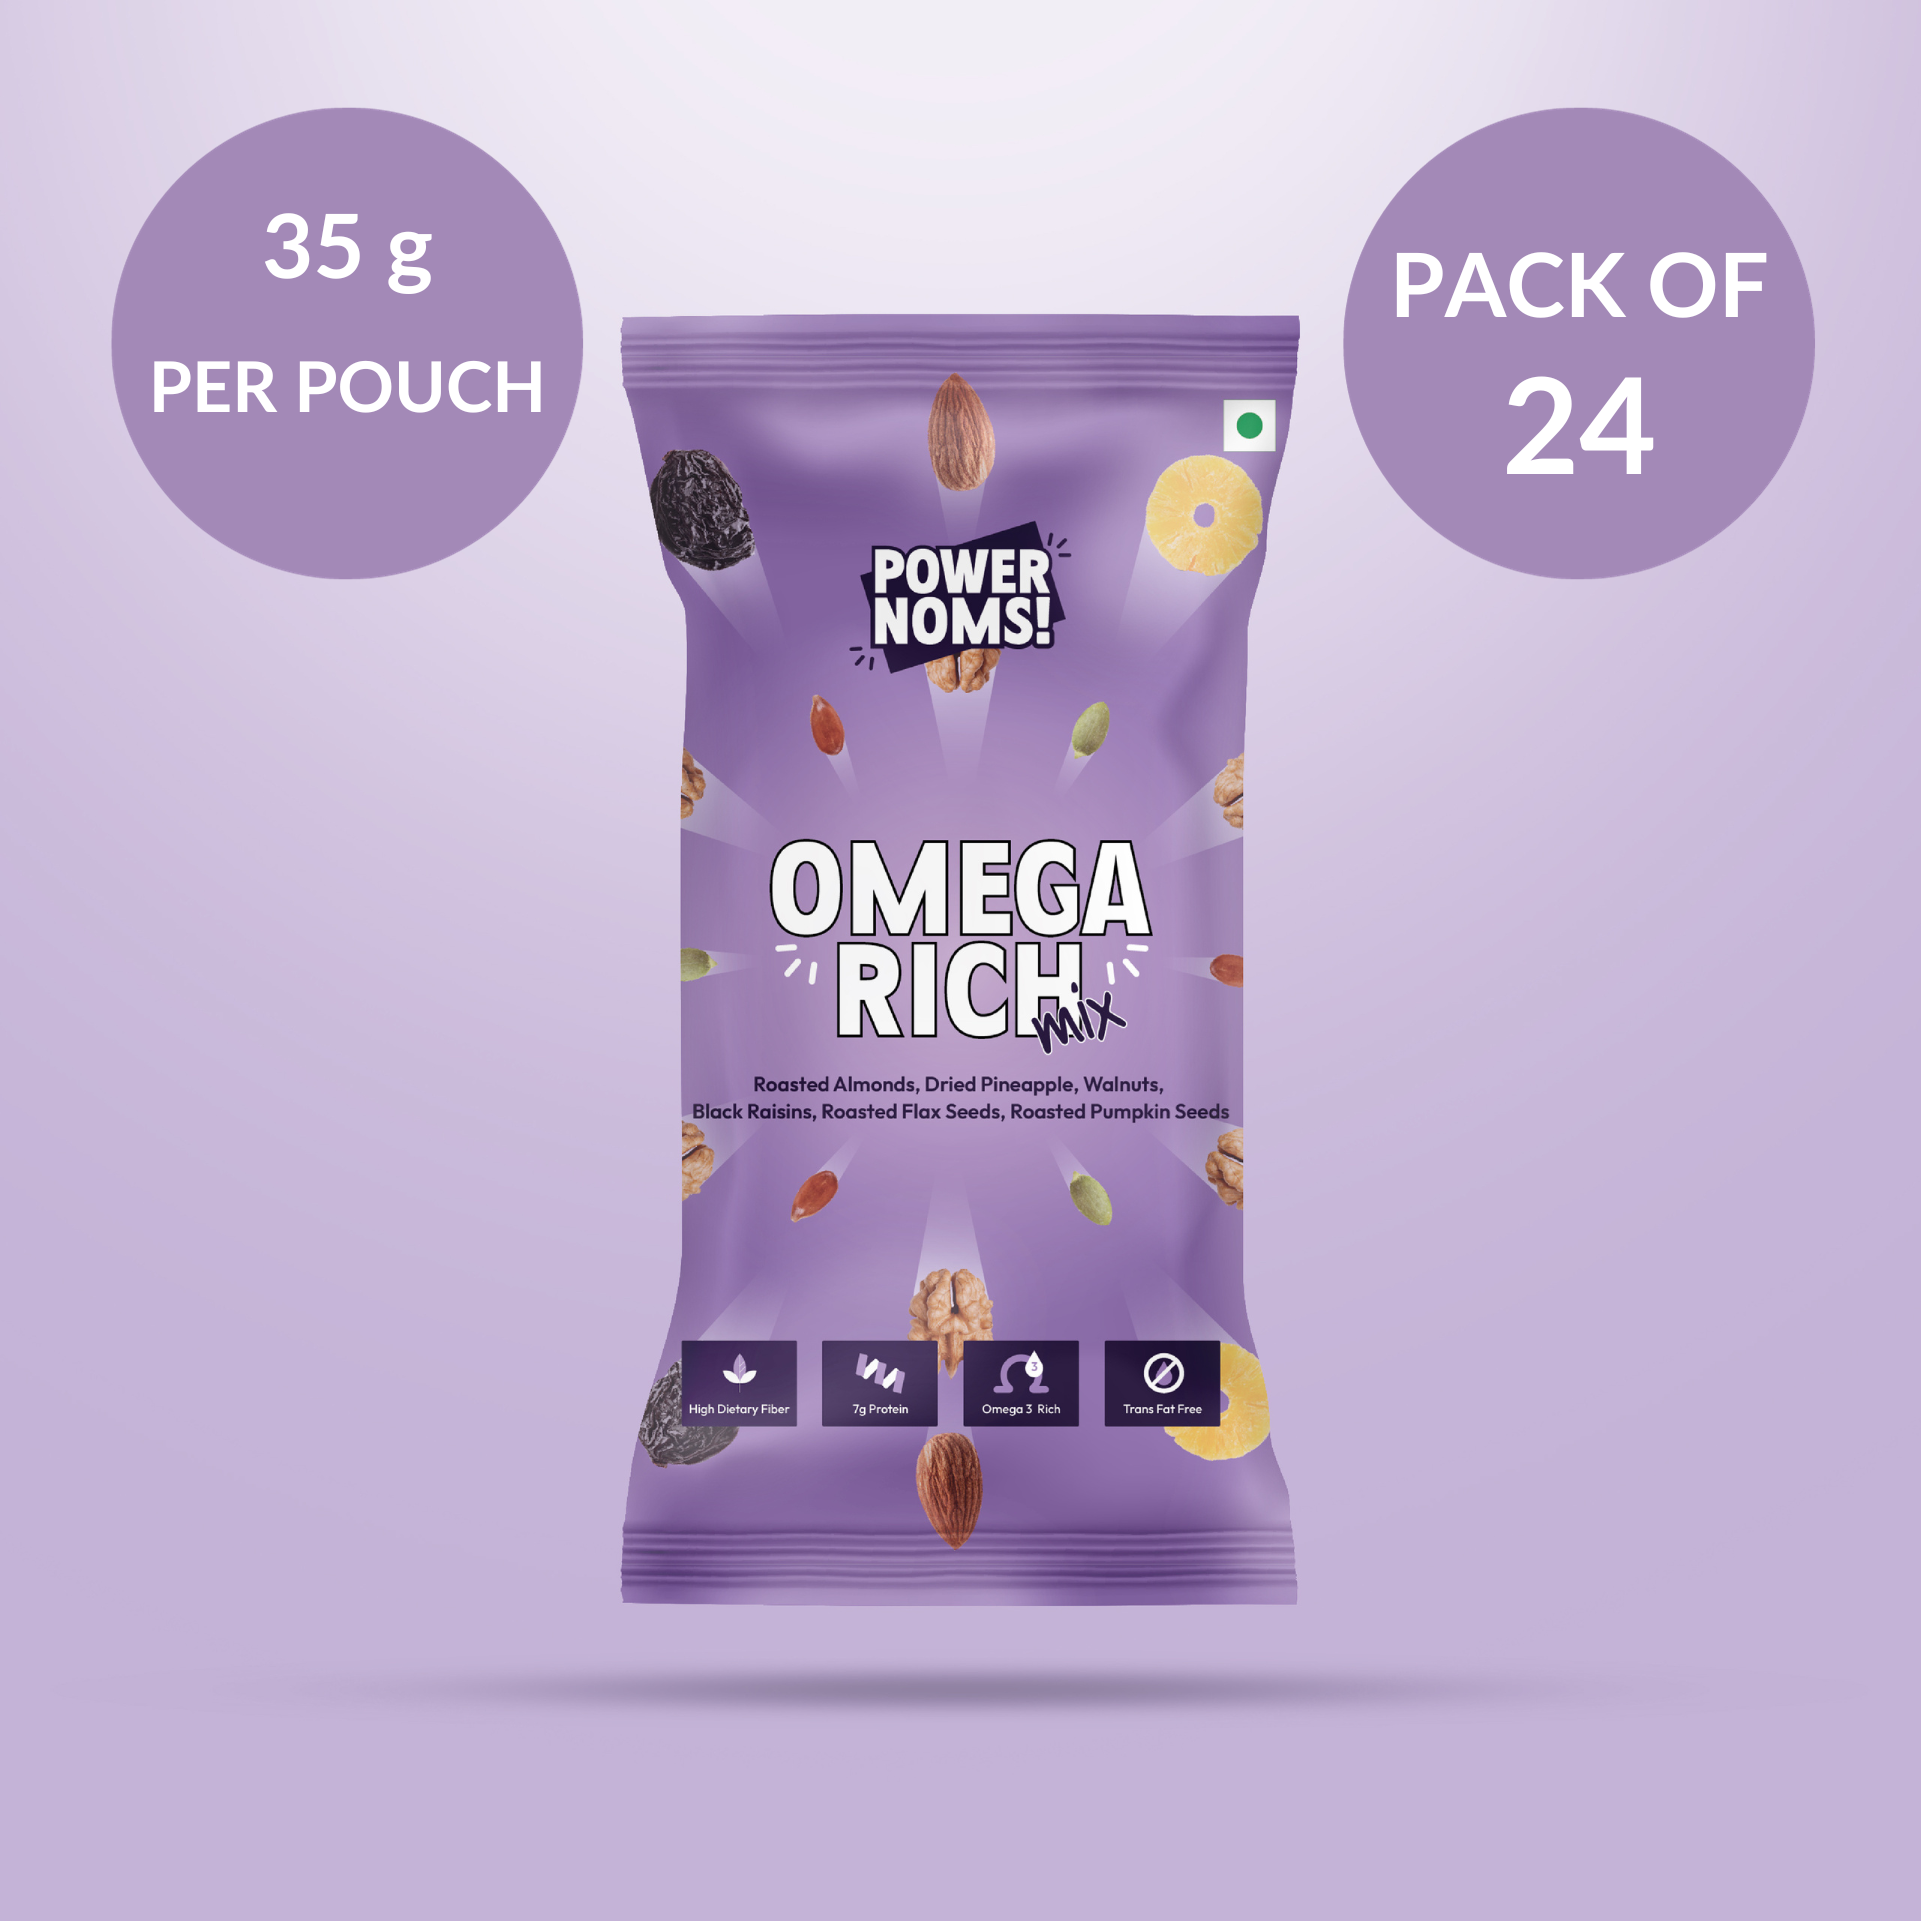 powernoms omega rich mix pack of 24